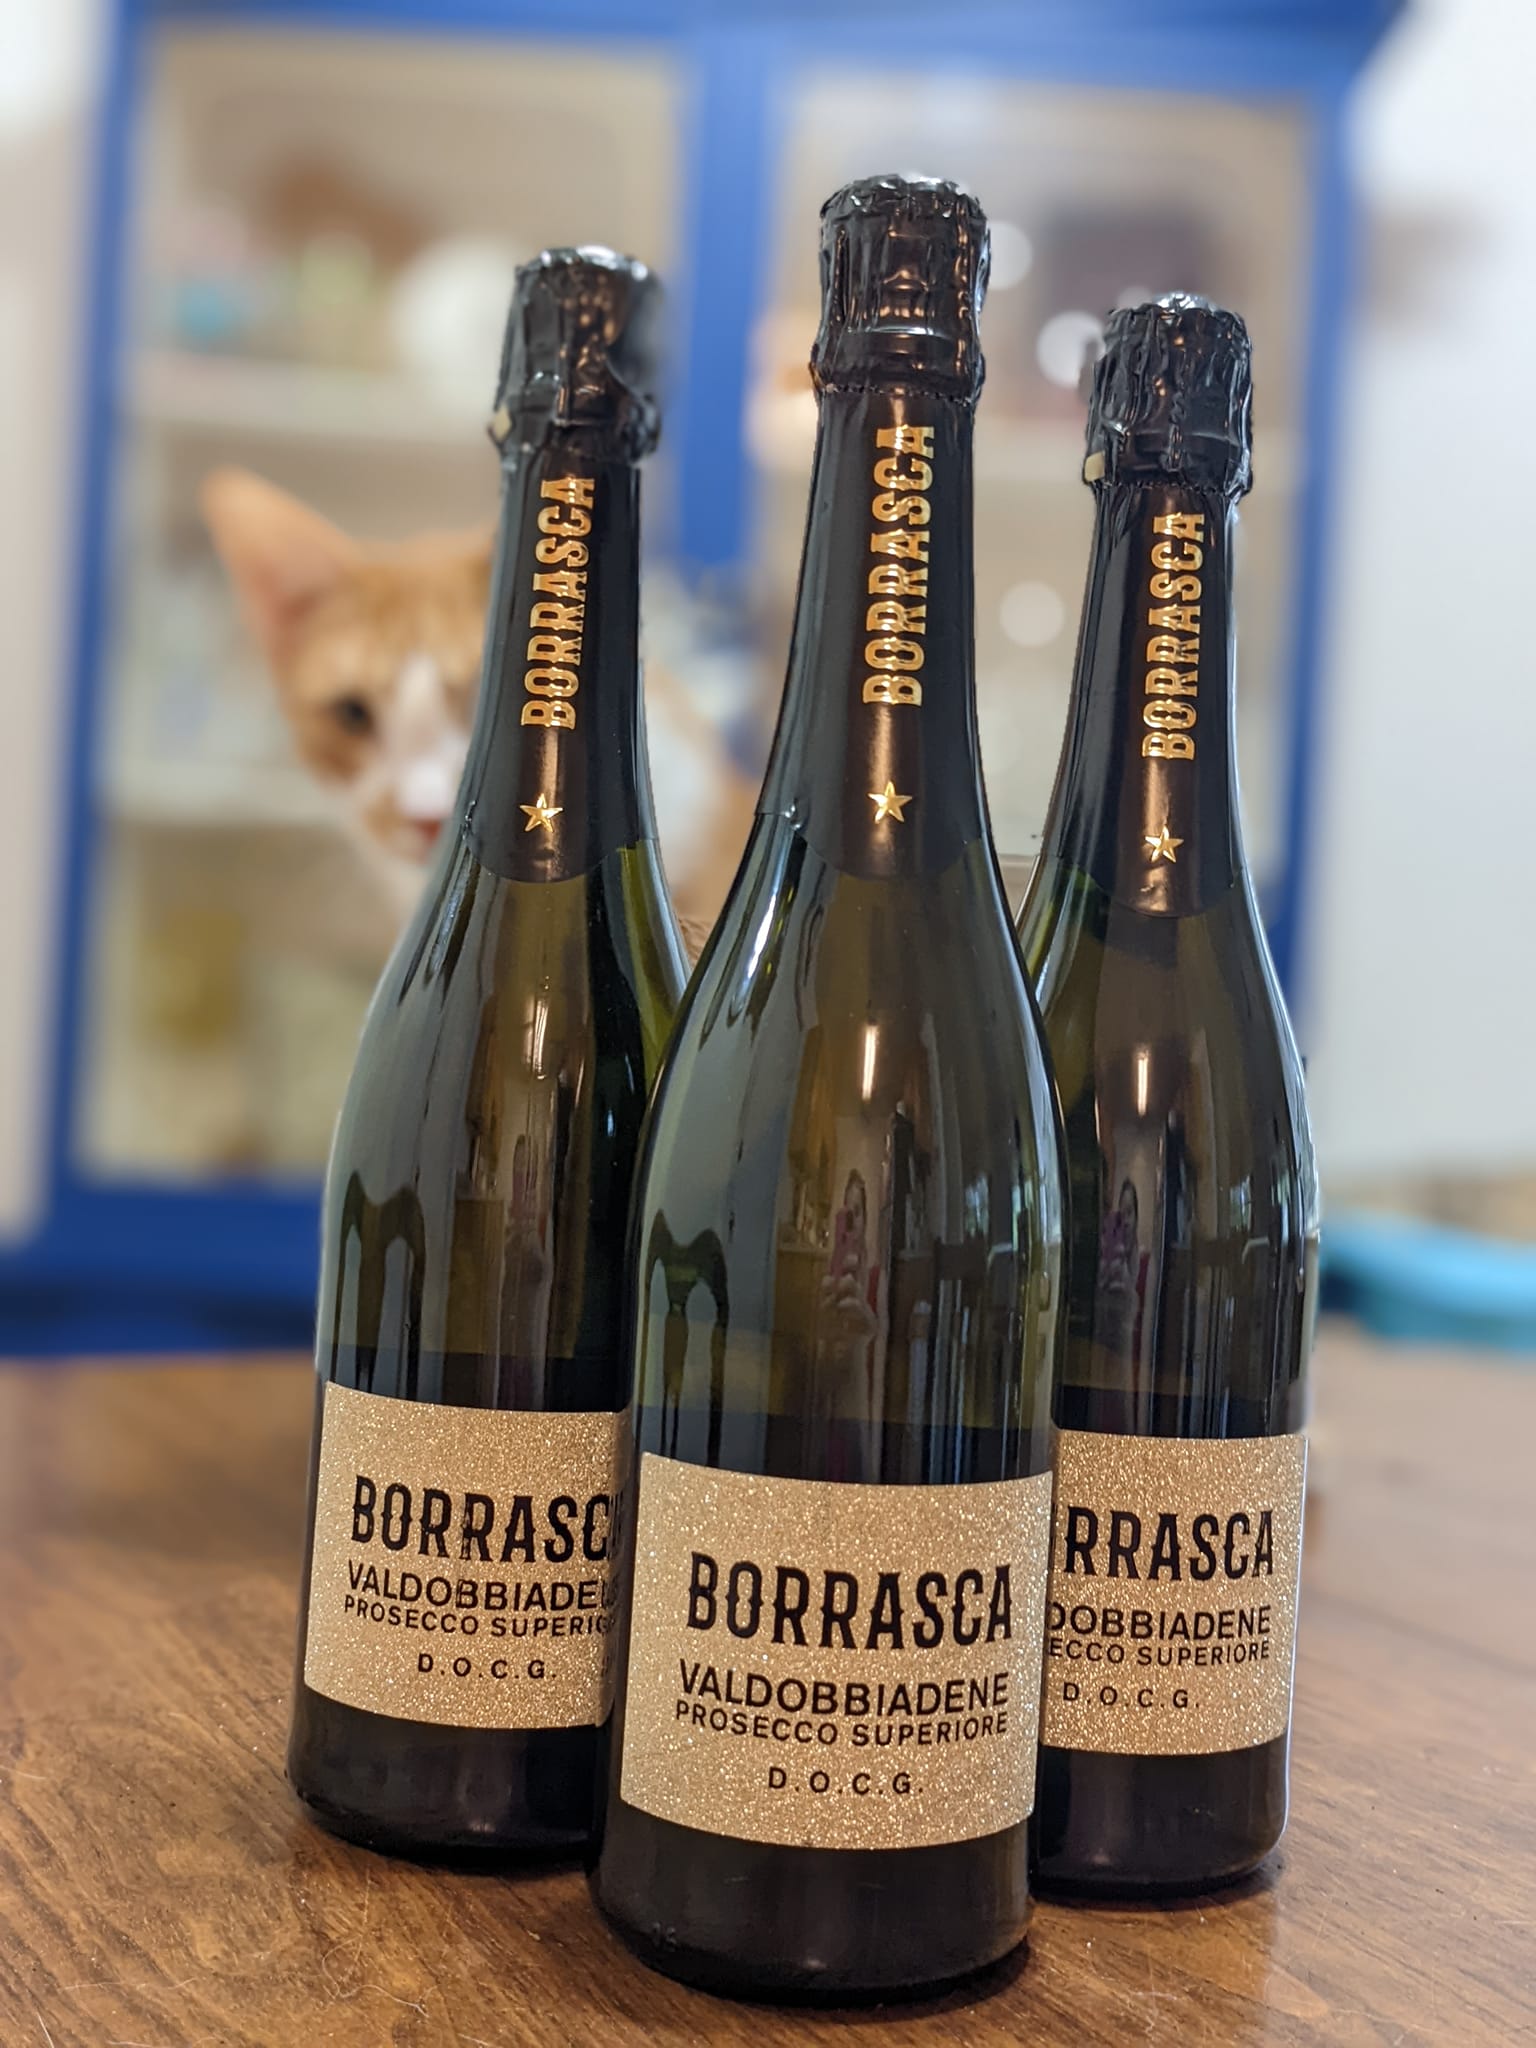 three bottles of Borrasca brand prosecco with glittery gold labels and a blurry cat face looking on behind them